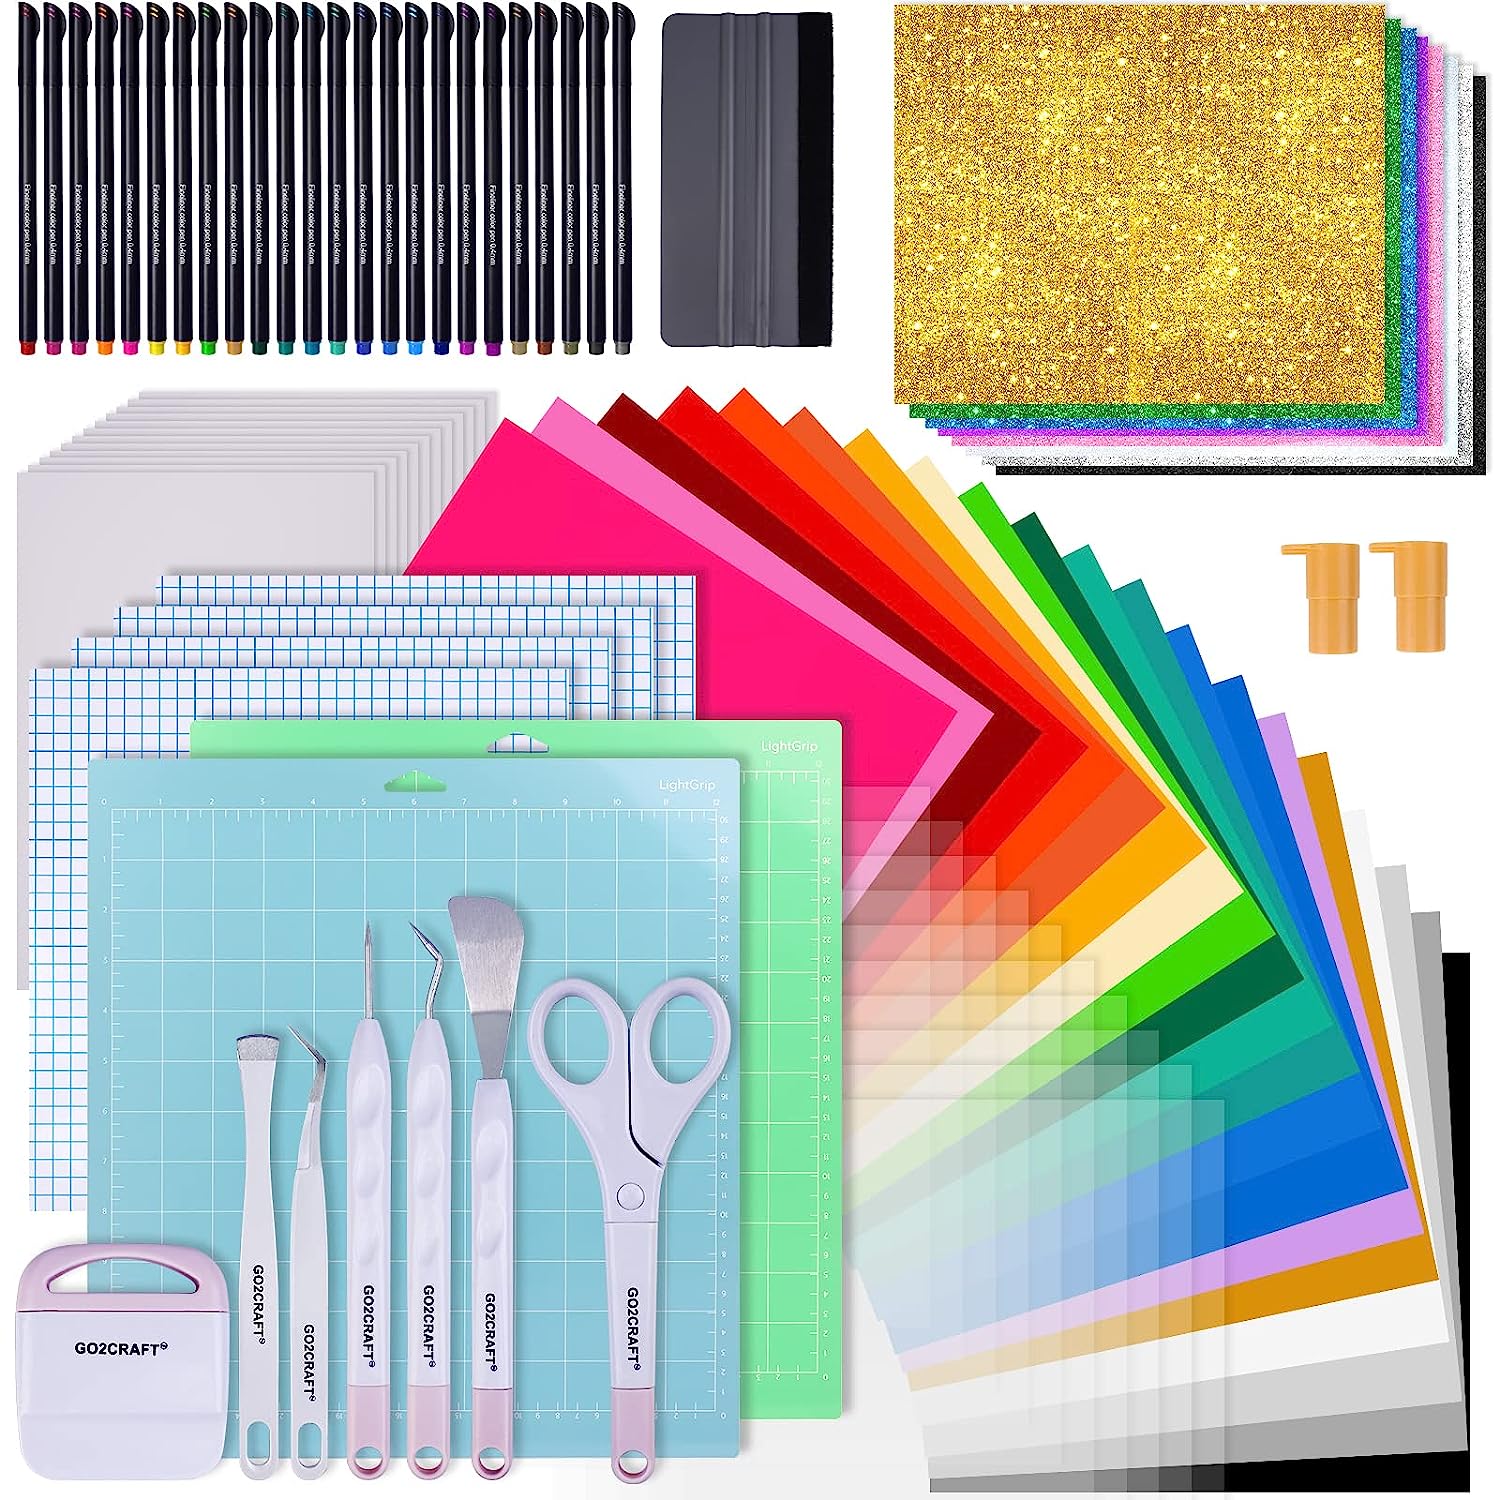 GO2CRAFT Accessories Bundle for Cricut Makers and All [...]